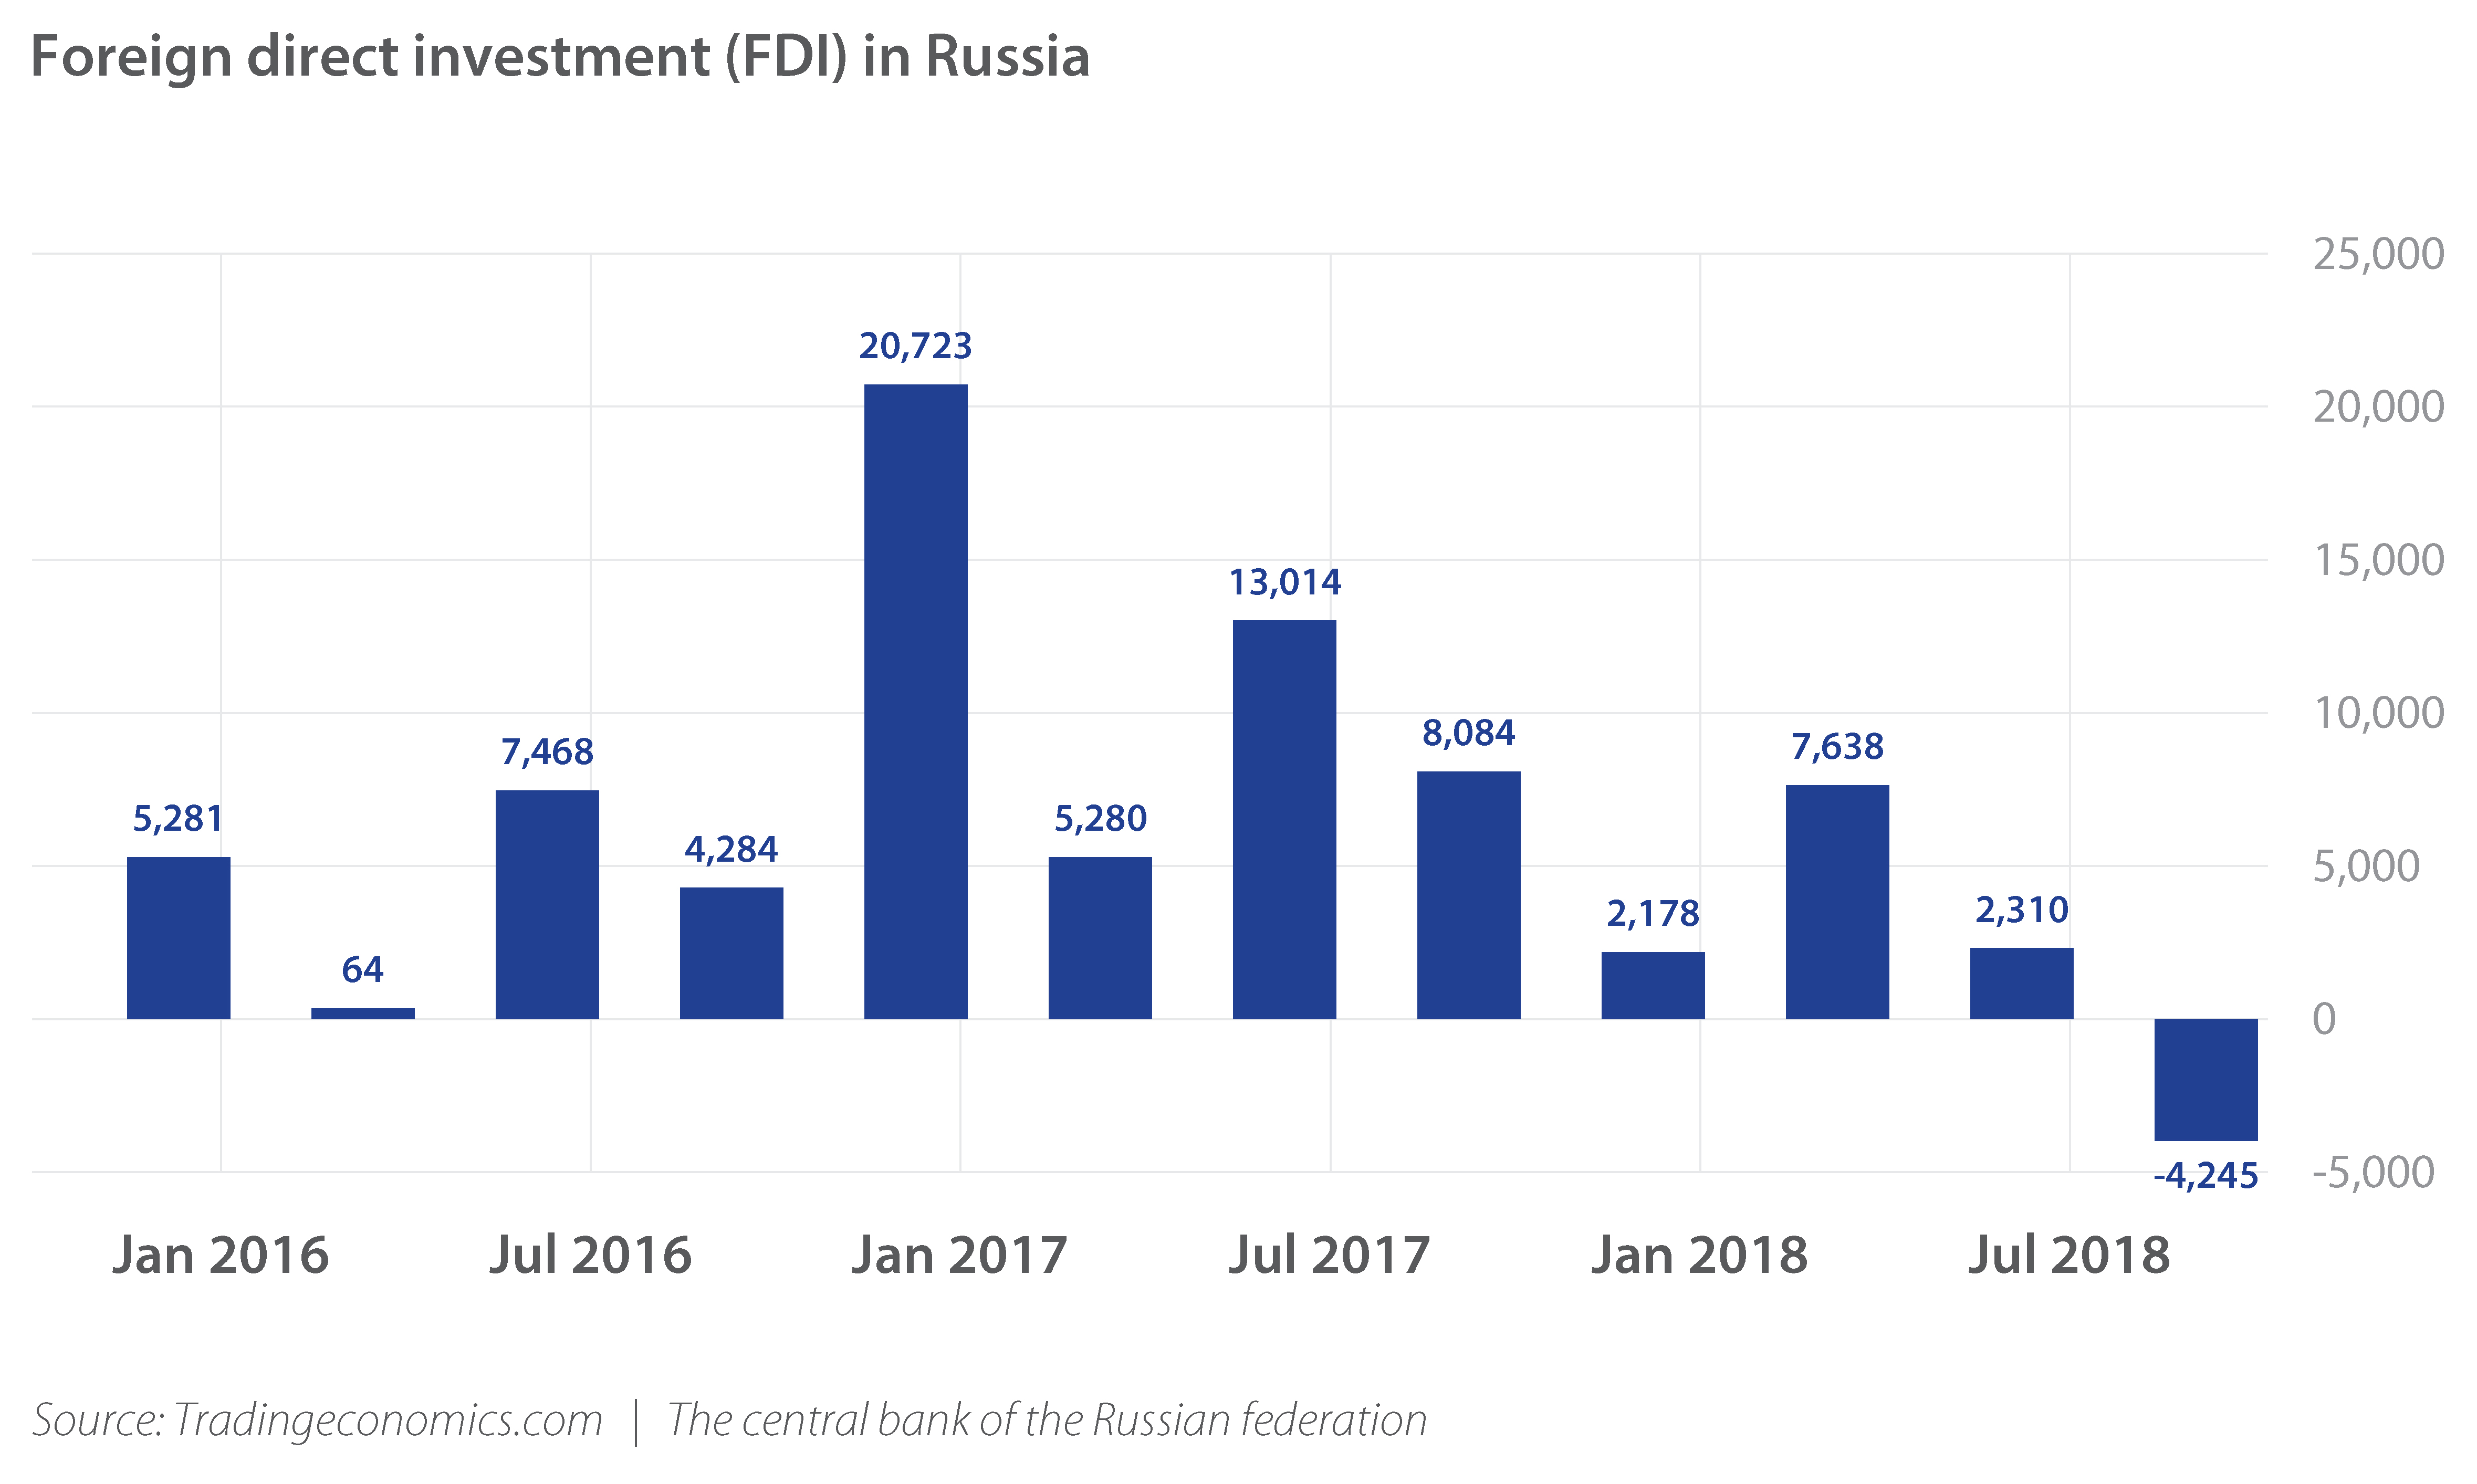 Foreign Direct Investment in Russia 